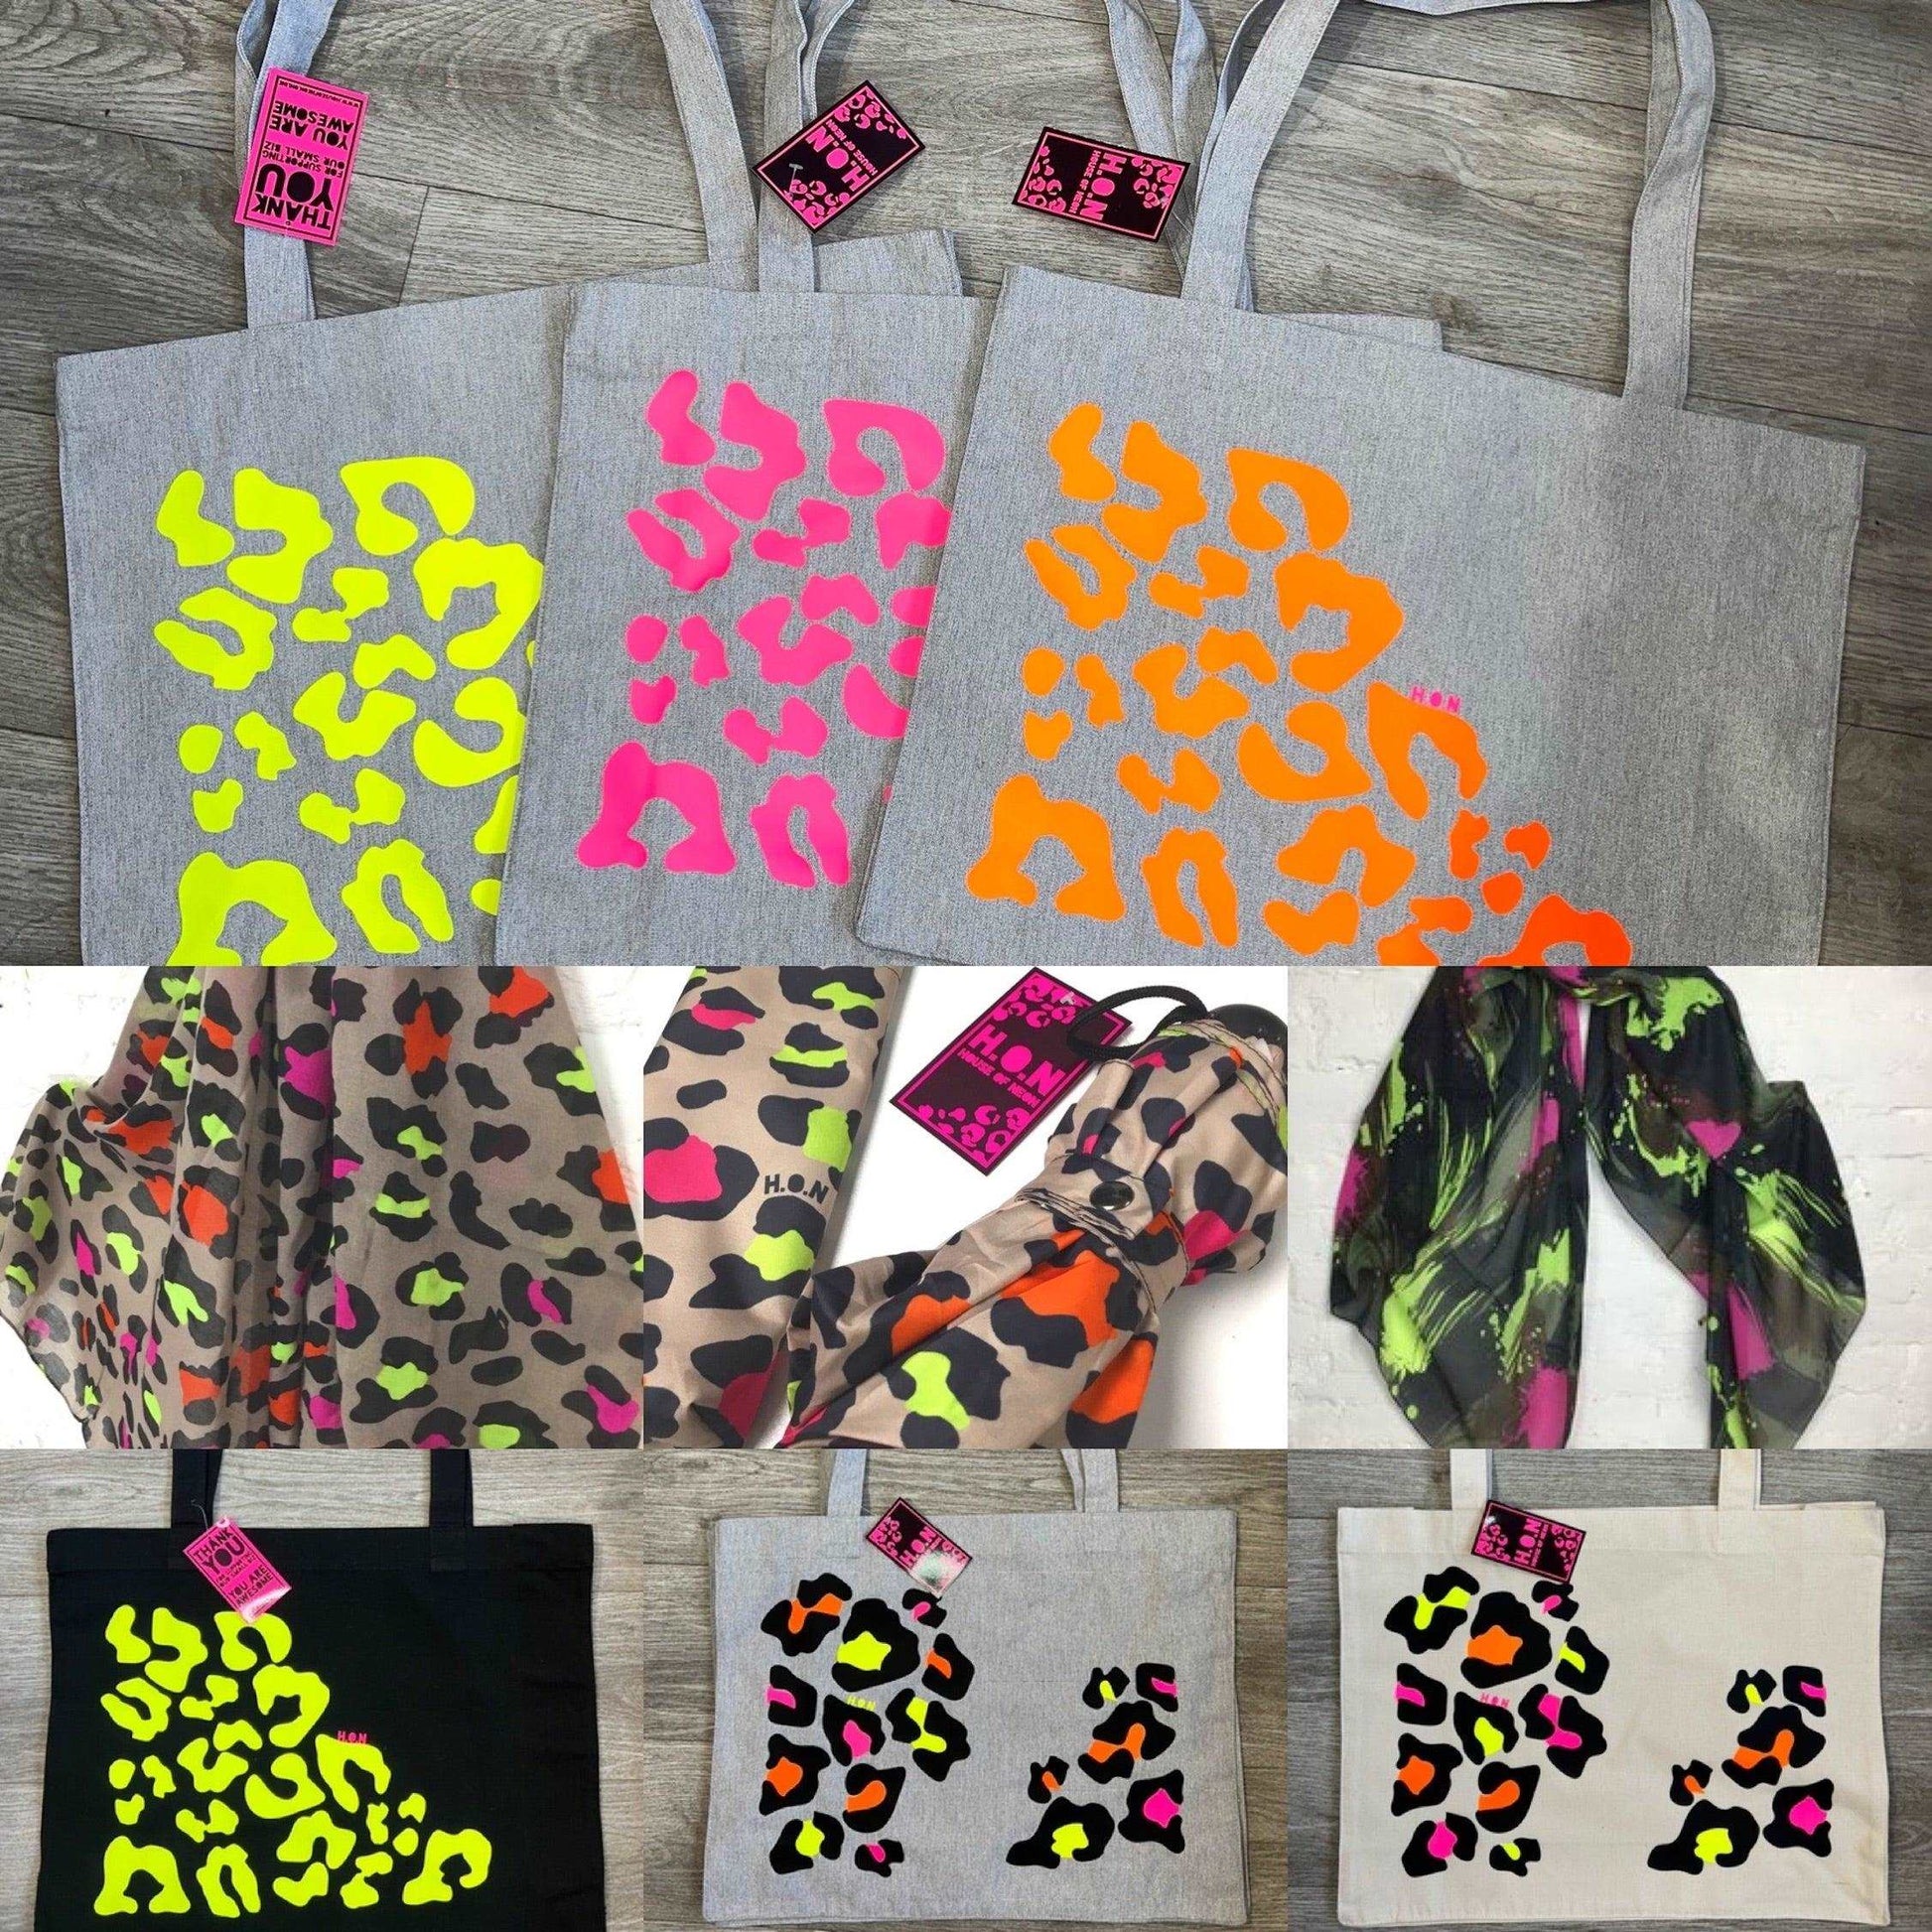 House of Neon Tote bags